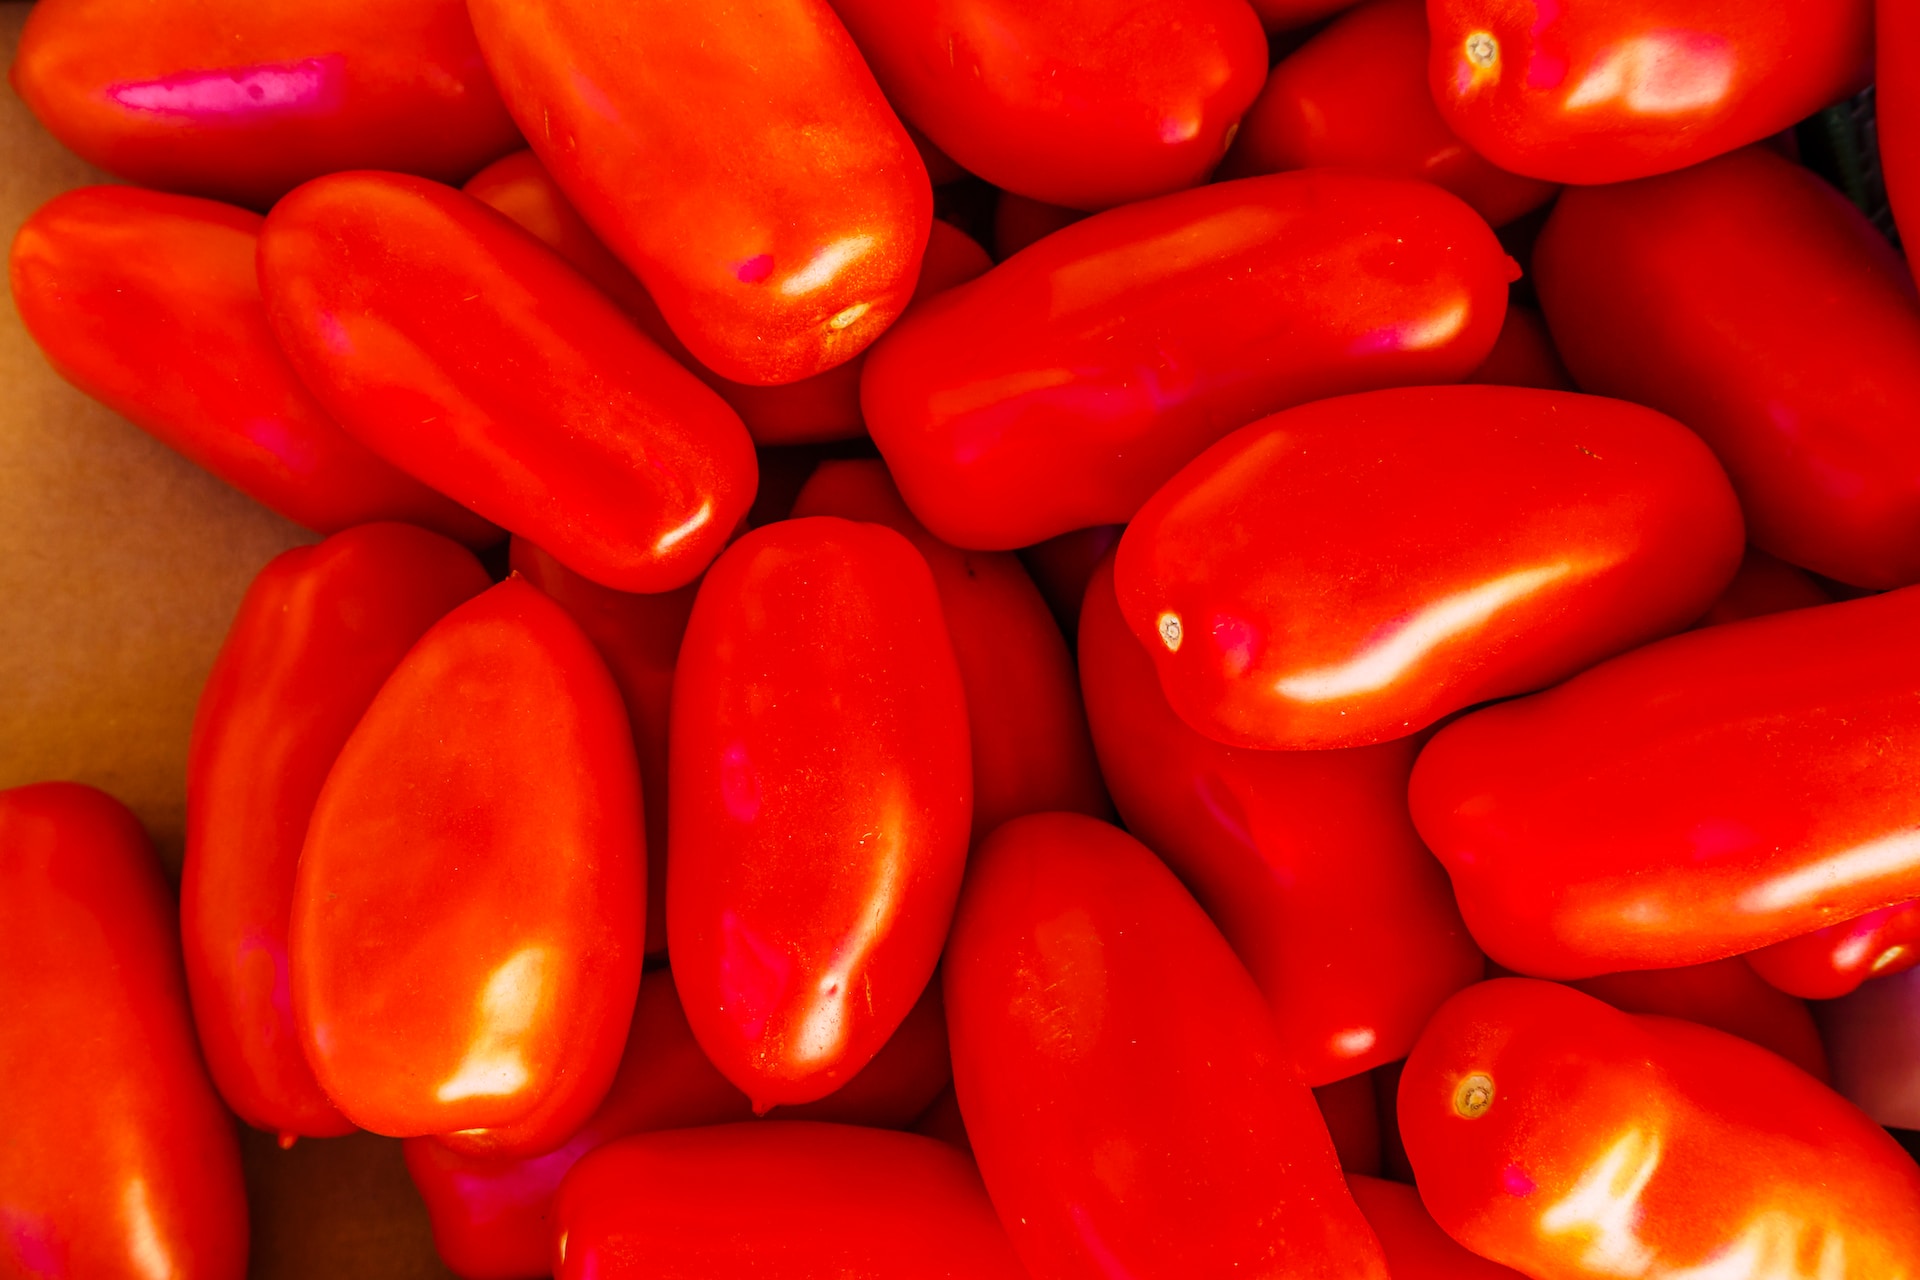 Strange story: tomato ketchup was used as medicine